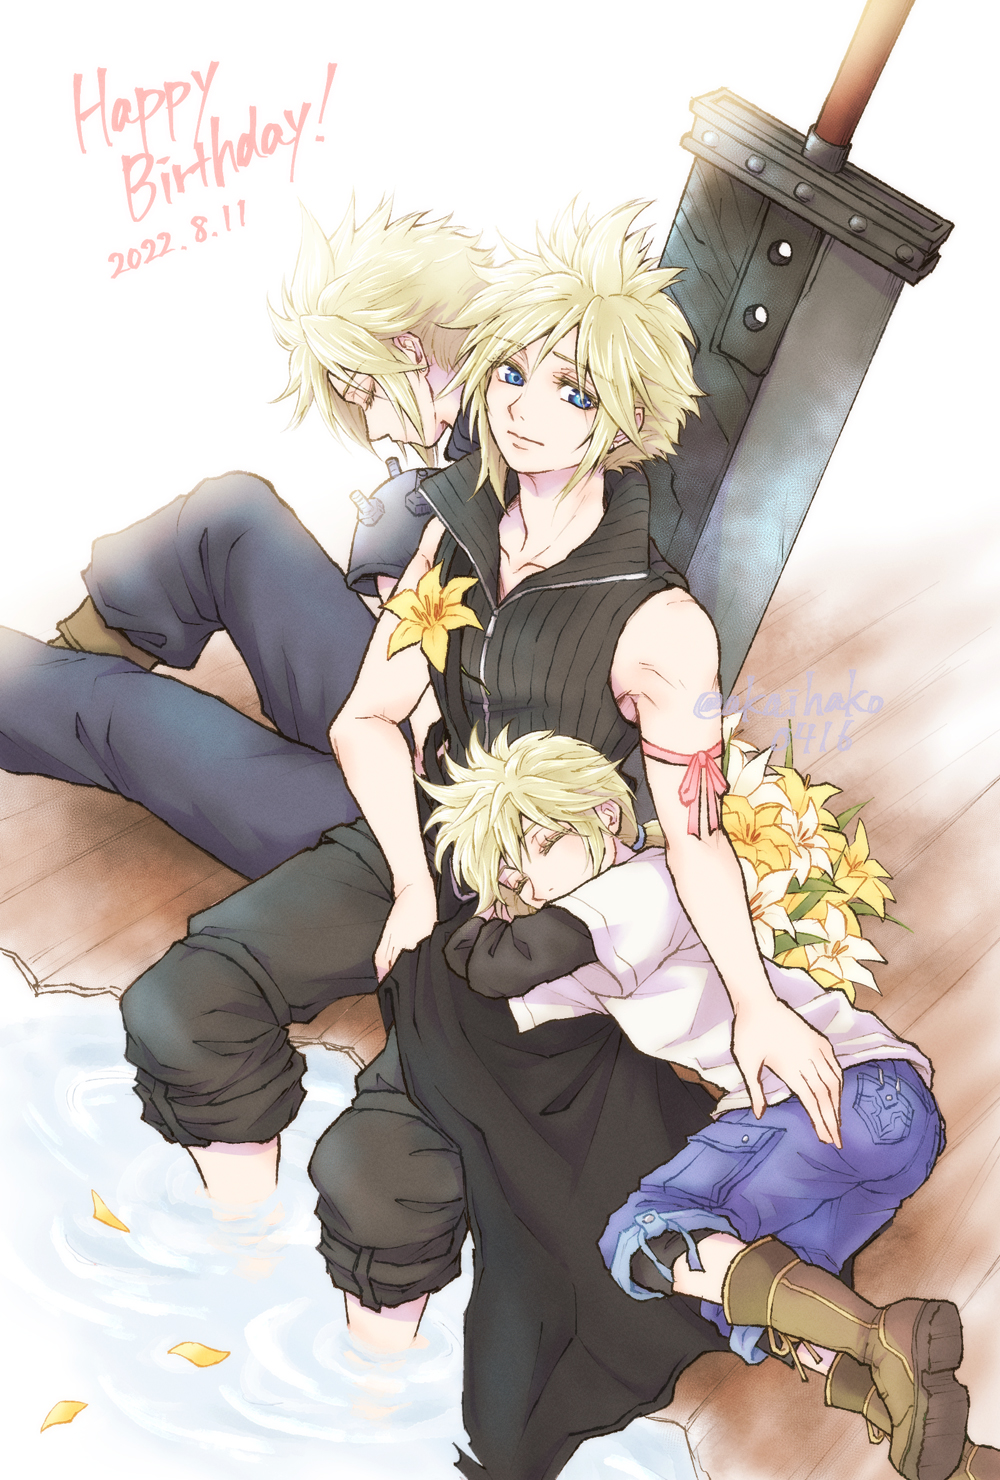 3boys arm_ribbon black_pants black_shirt blonde_hair blue_eyes blue_shorts boots brown_footwear buster_sword closed_eyes dated earrings final_fantasy final_fantasy_vii final_fantasy_vii_advent_children final_fantasy_vii_remake flower hair_between_eyes happy_birthday head_down high_collar highres jewelry lap_pillow layered_shirt looking_at_viewer low_ponytail male_child male_focus medium_hair multiple_boys multiple_persona open_collar pants pants_rolled_up pink_ribbon planted planted_sword ribbon shirt short_hair shorts single_earring sitting sleeveless sleeveless_shirt soaking_feet spiky_hair sword t-shirt thigh_strap waist_cape weapon white_flower white_shirt wooden_floor yellow_flower you_(blacknwhite) younger